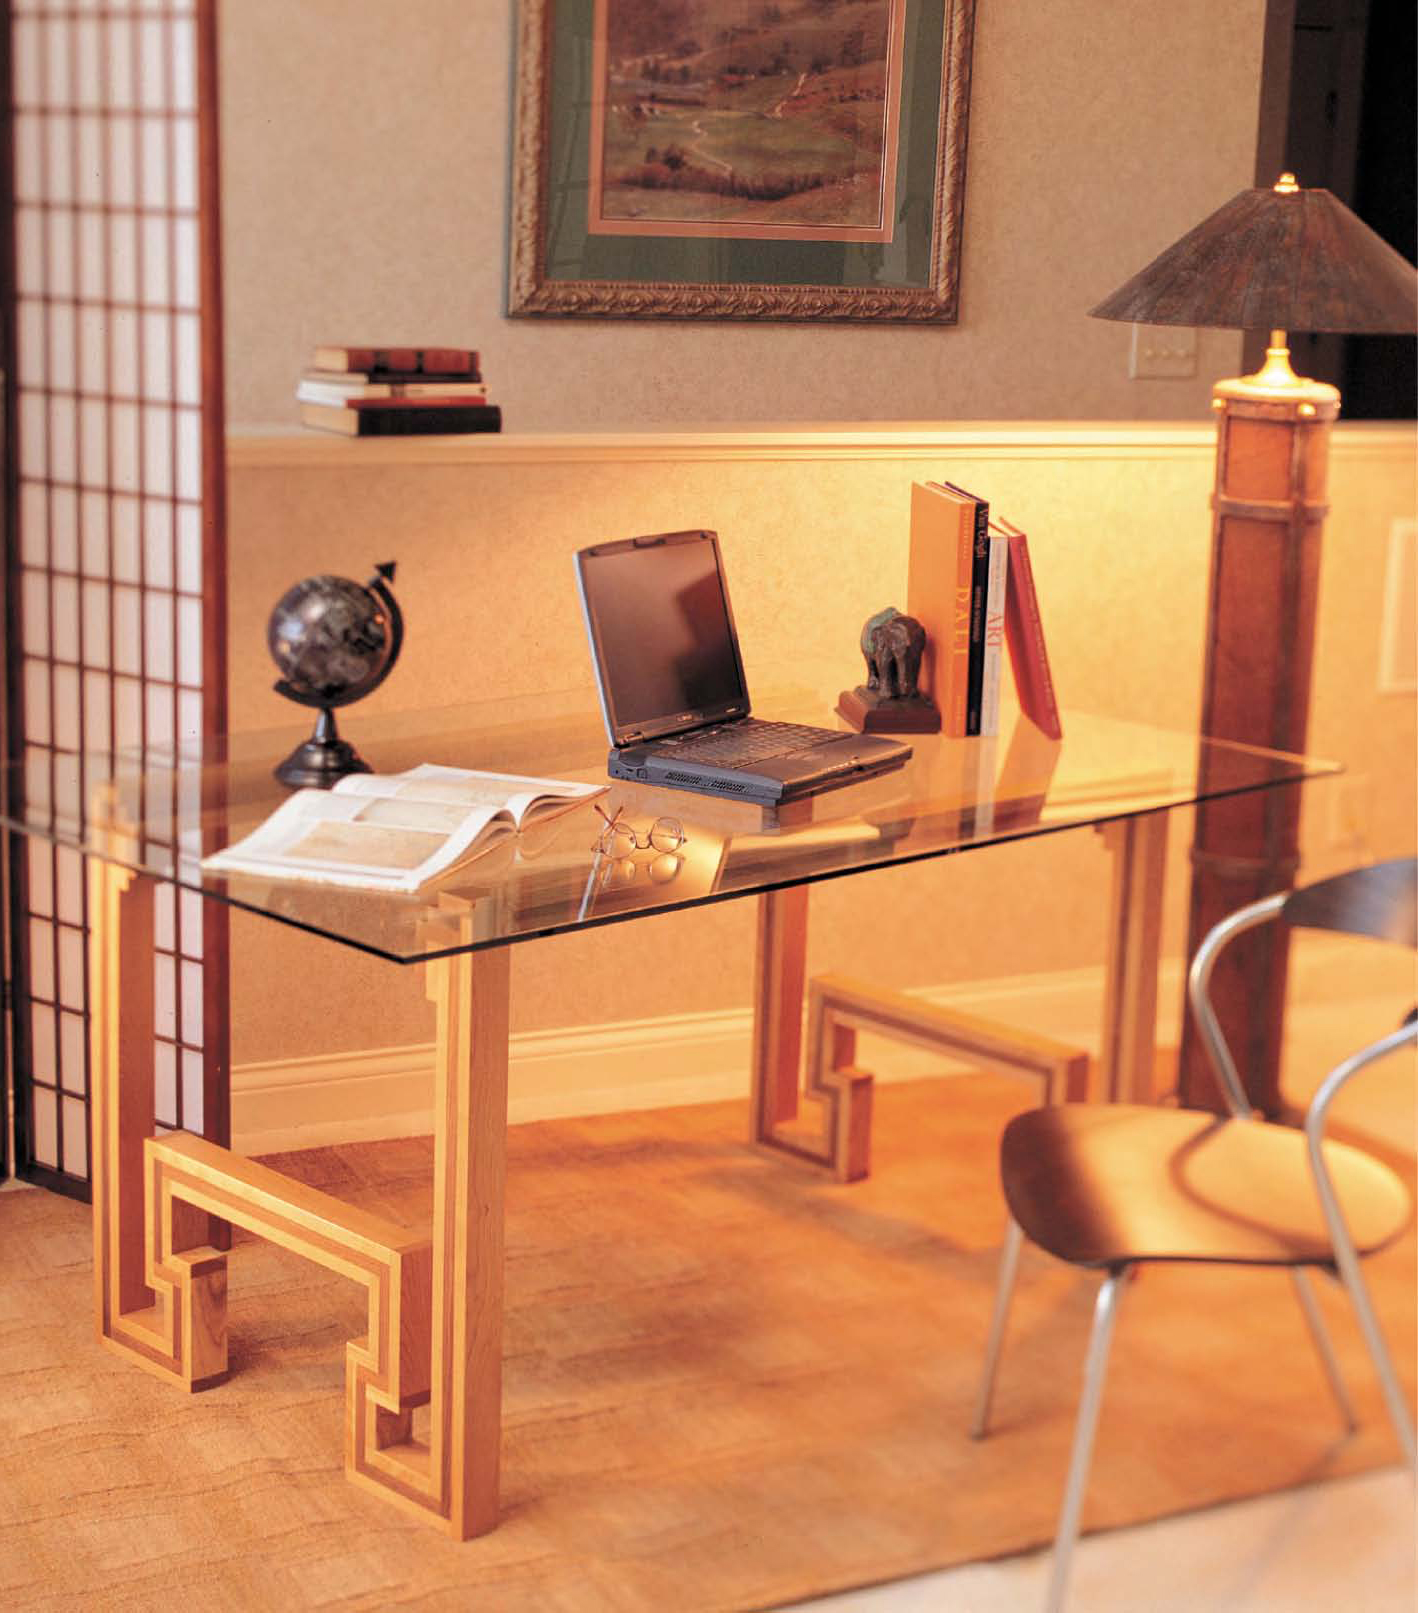 How to Build a Desk A Free Ebook - Popular Woodworking 